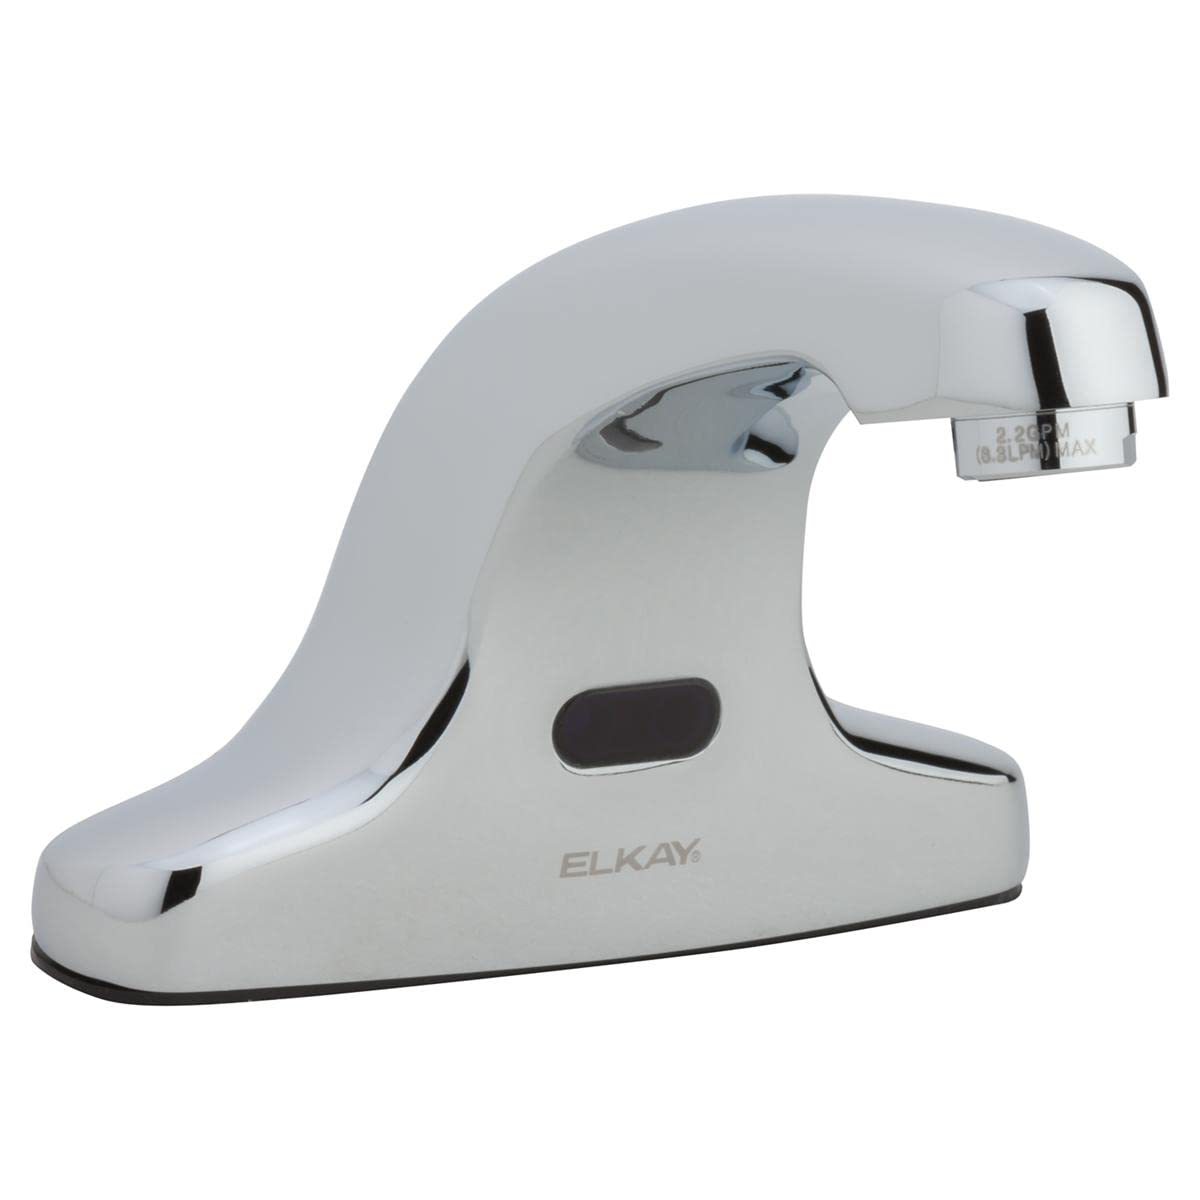 Elkay LKB737C Commercial Electronic Lavatory Battery Powered Deck Mount Faucet w - $494.99